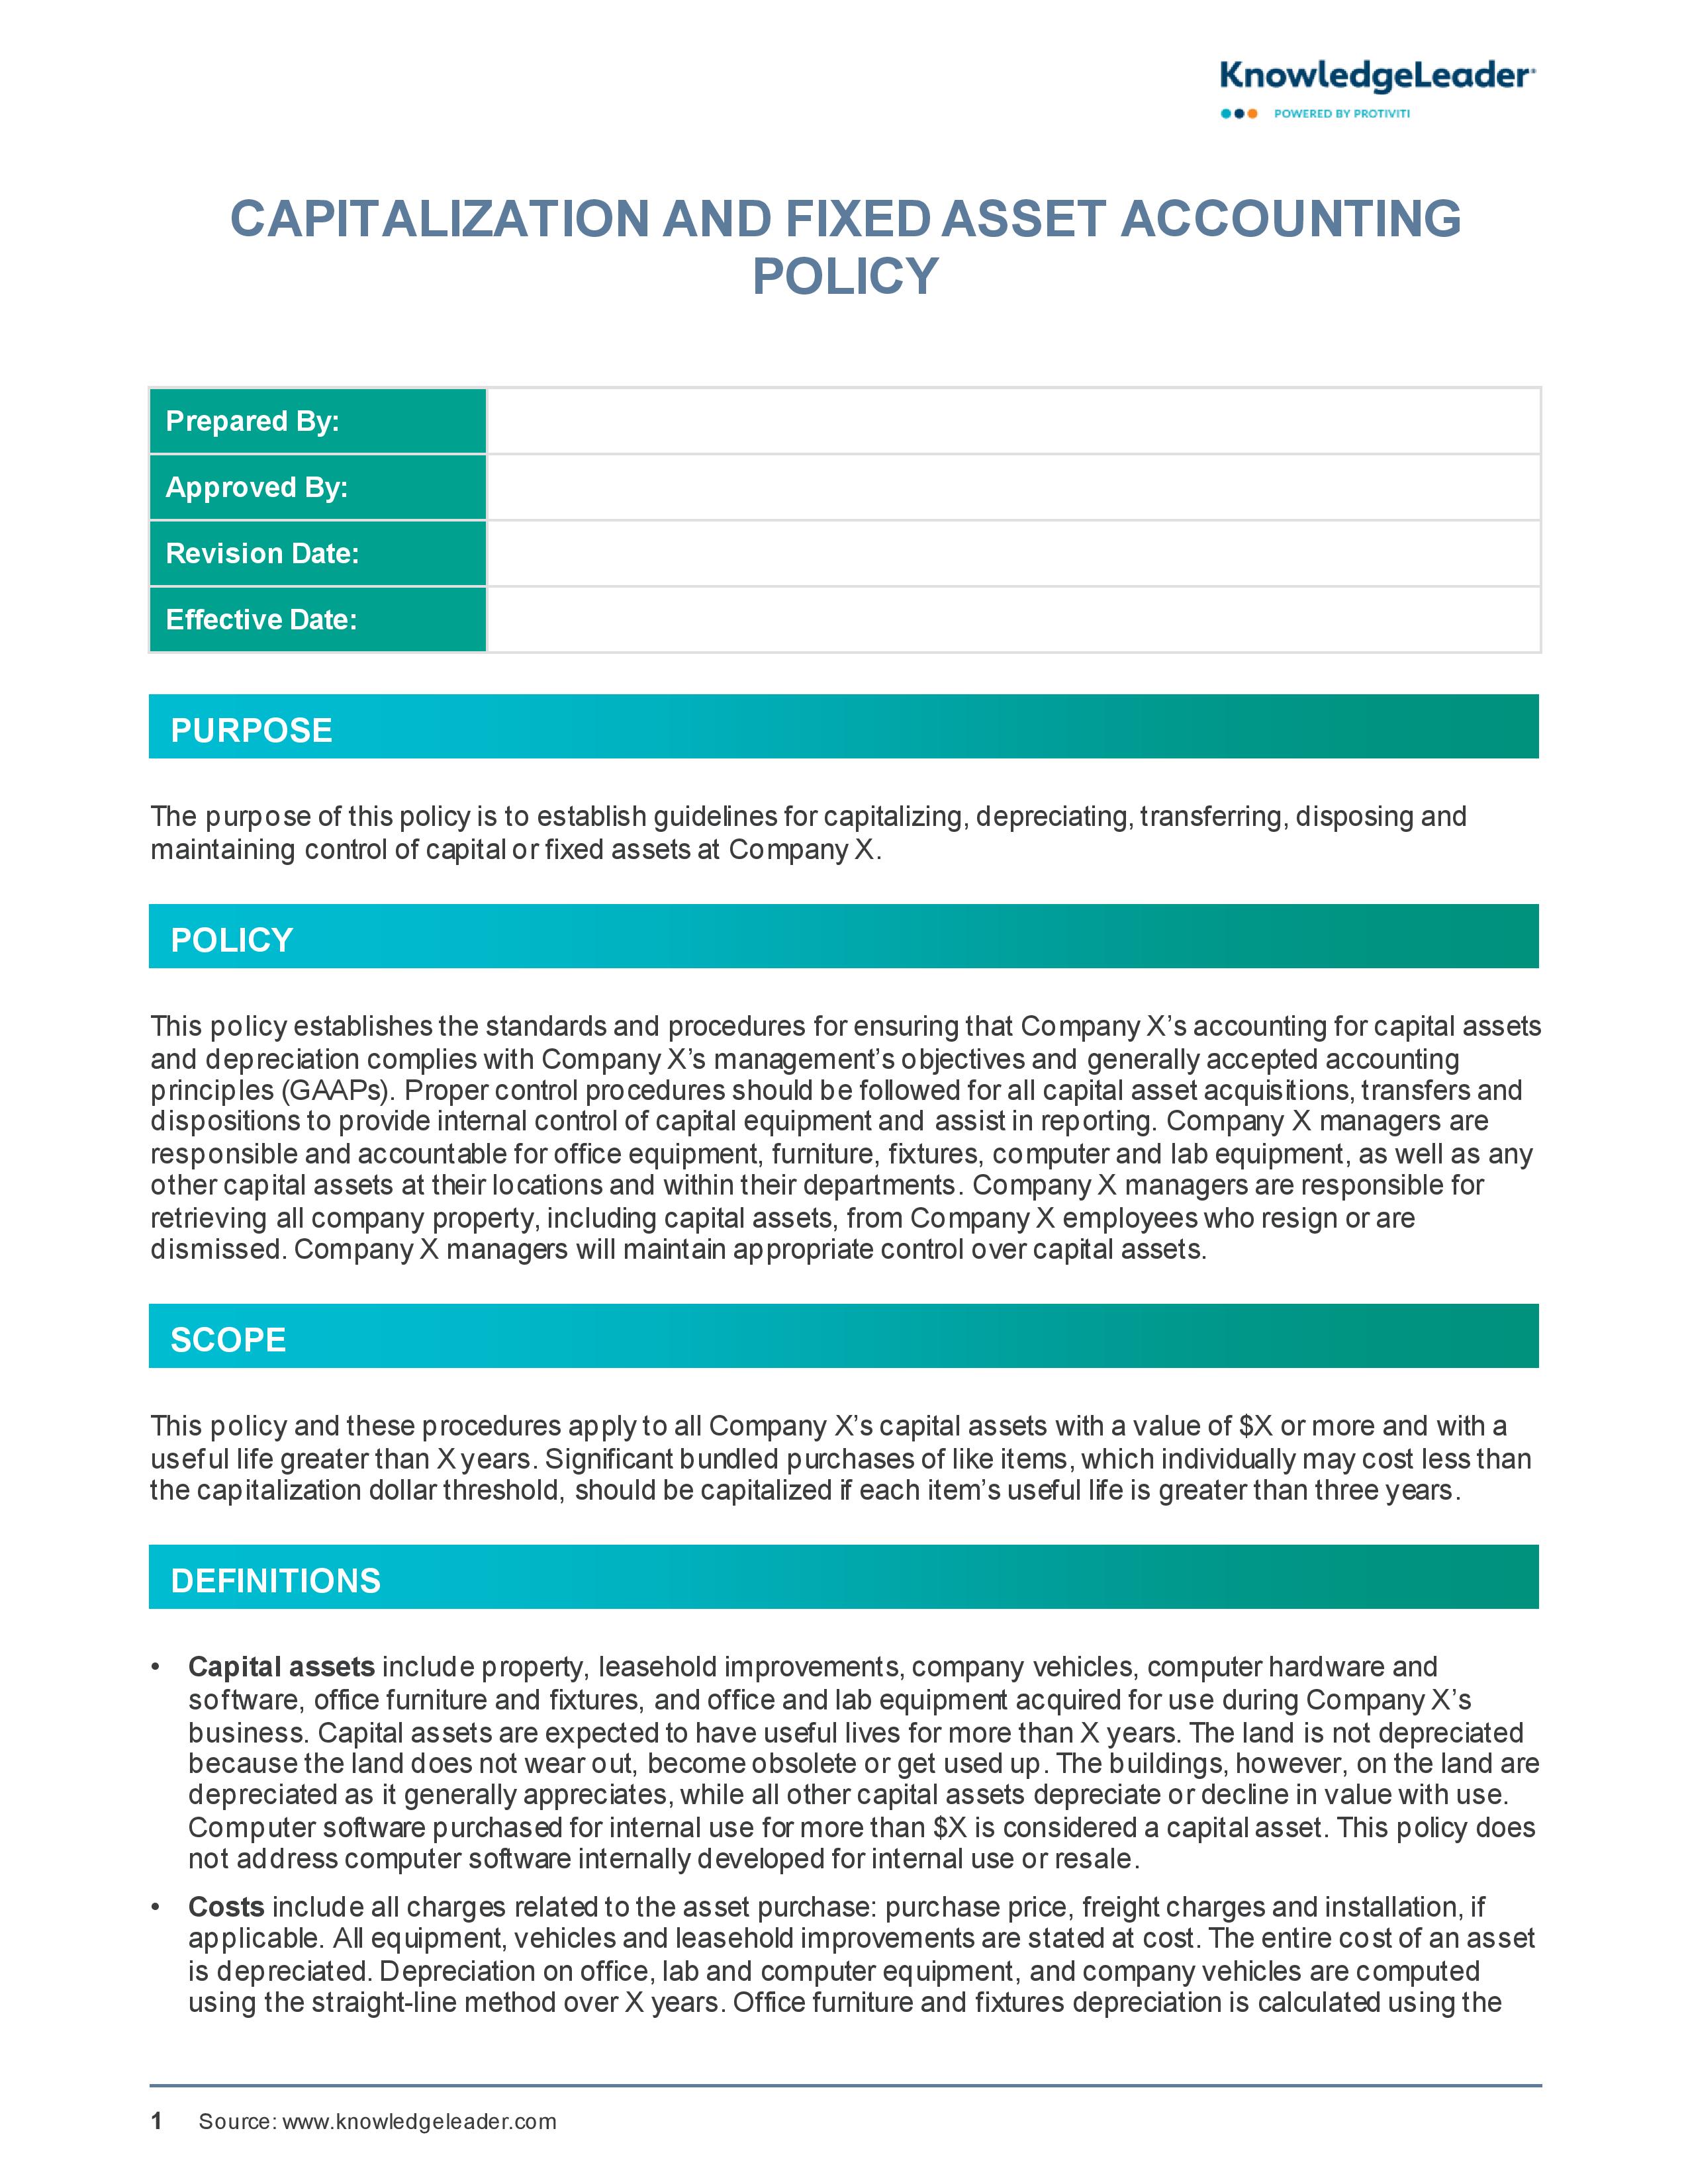 Screenshot of the first page of Capitalization and Fixed Asset Accounting Policy